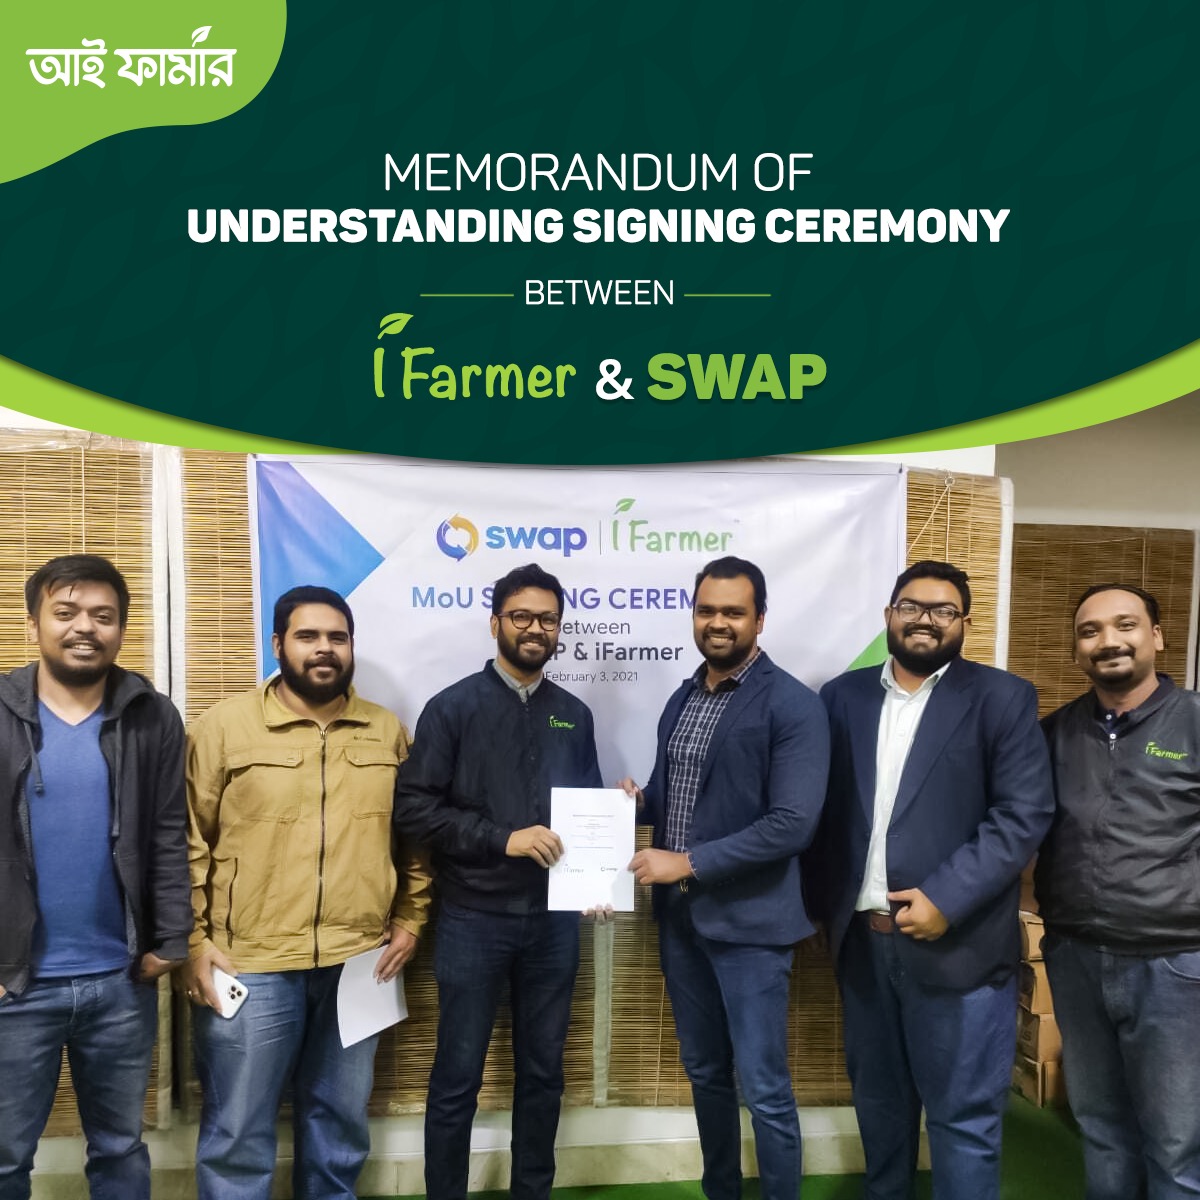 The Memorandum of Understanding (MoU) signing ceremony was held between the agri-tech company iFarmer and re-commerce platform SWAP